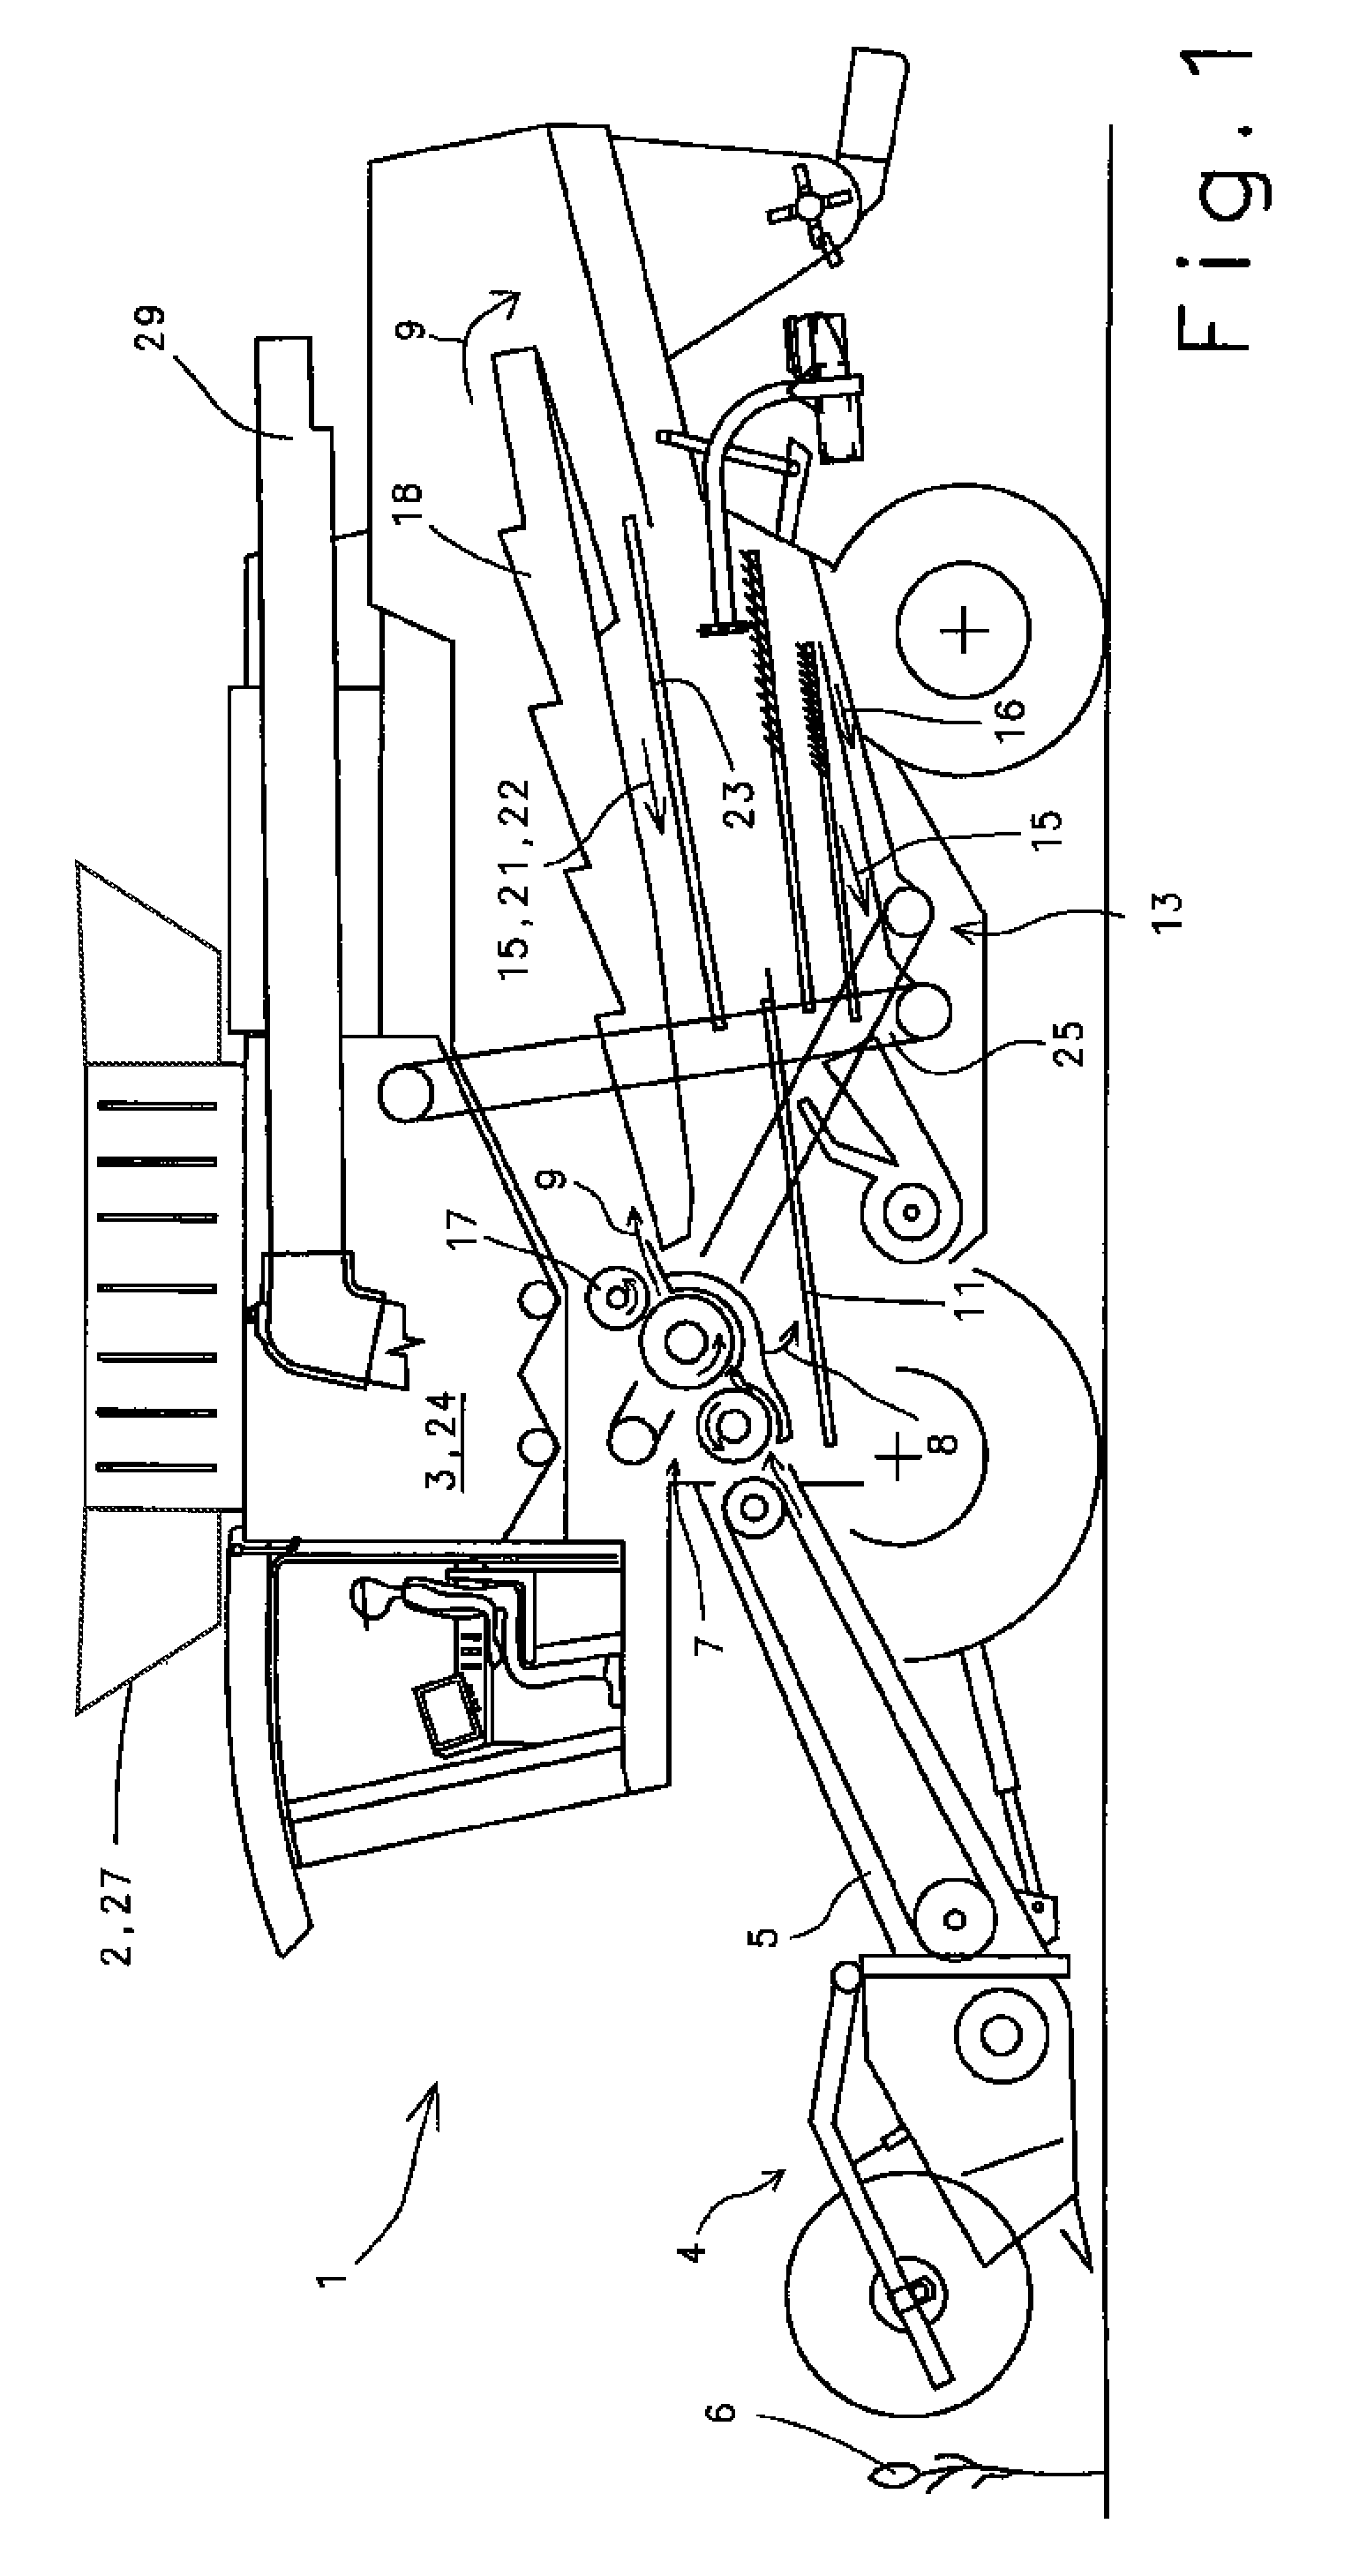 Extension attachment for a bulk material container